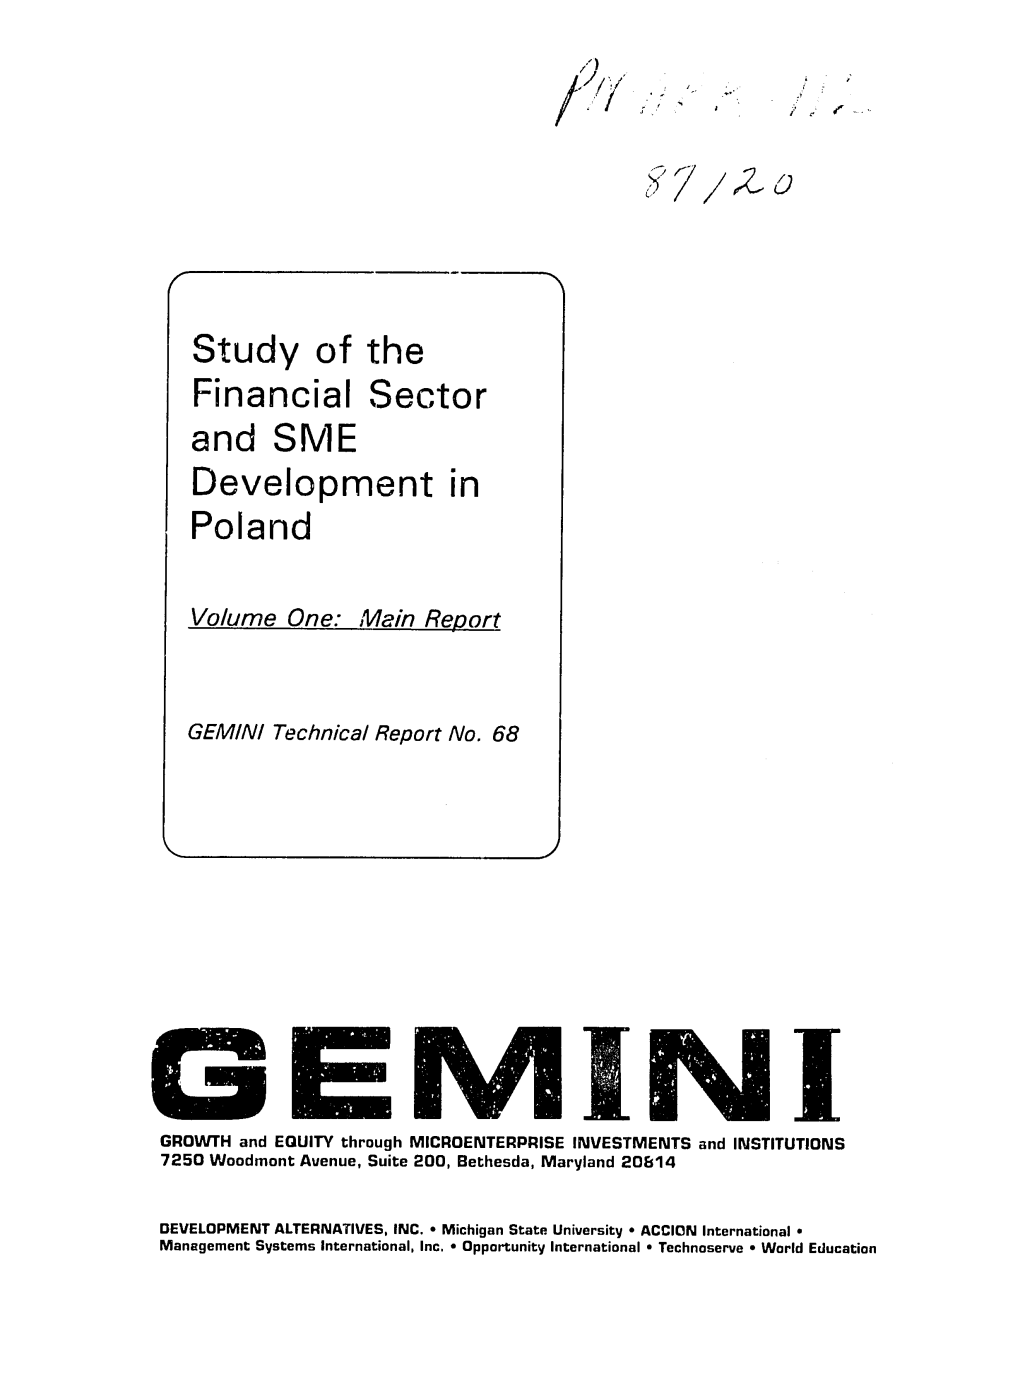 Study of the Financial Sector and SME Development in Poland